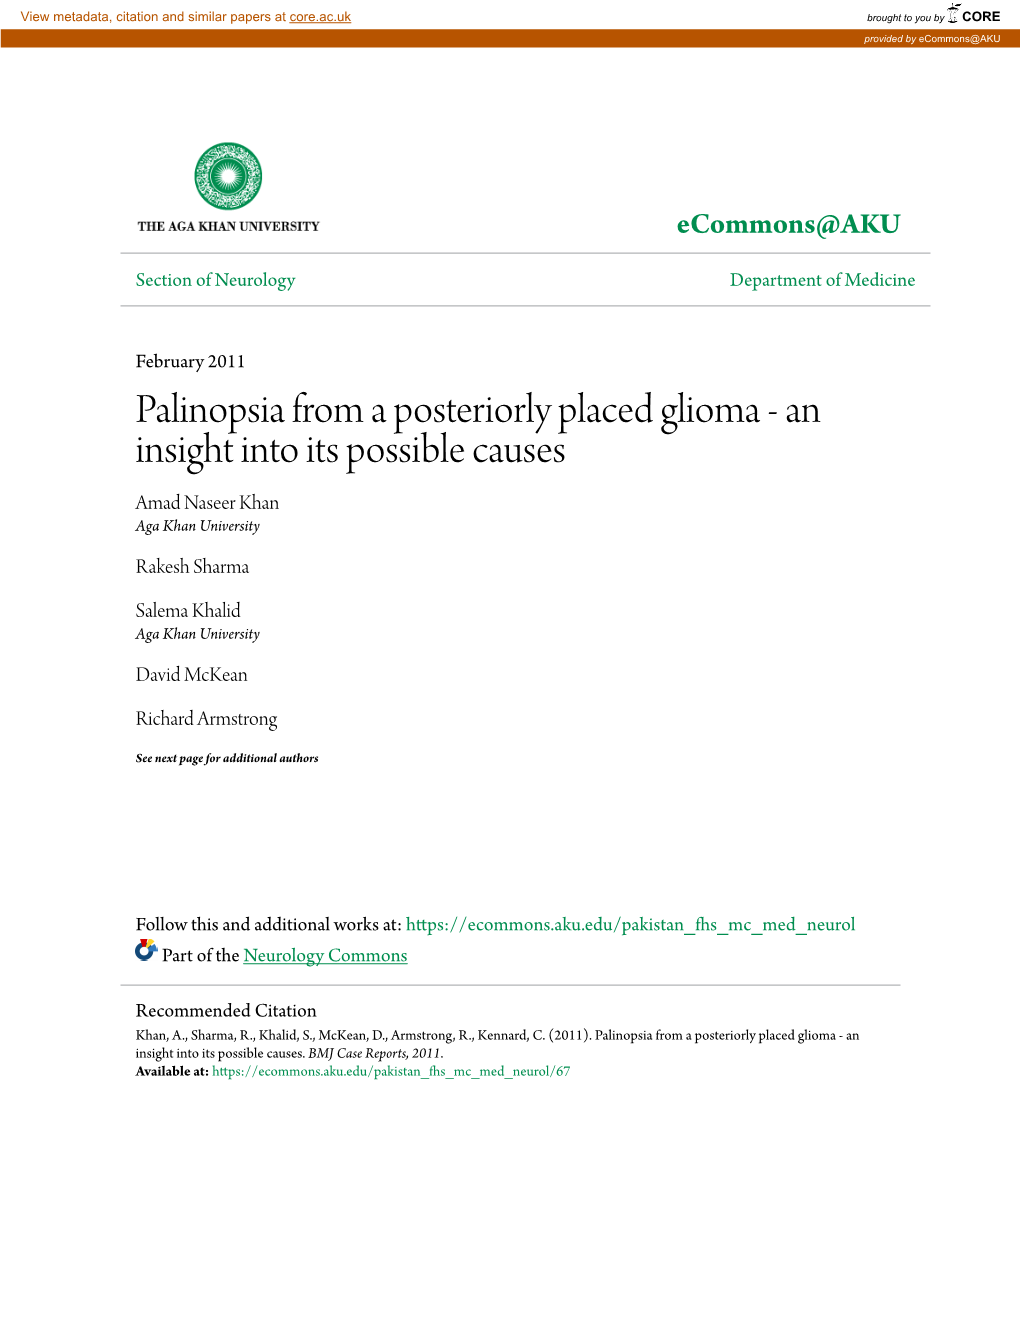 Palinopsia from a Posteriorly Placed Glioma - an Insight Into Its Possible Causes Amad Naseer Khan Aga Khan University